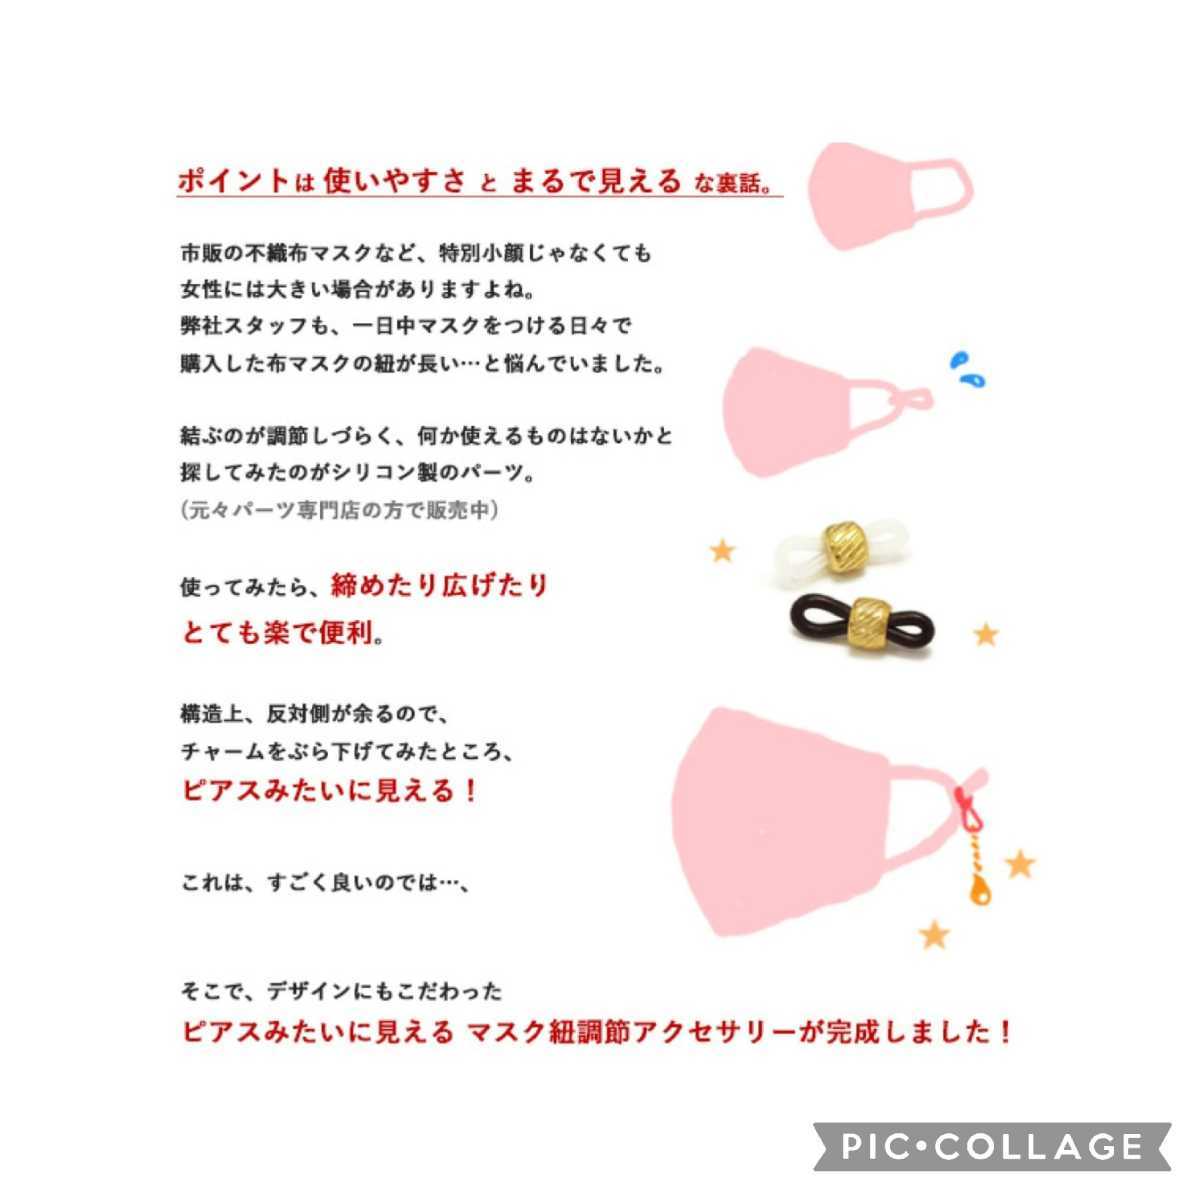  new goods unused earrings as with is seen mask cord adjustment accessory Gold * ball sphere 3 color Random ( both ear for )4 kind set 